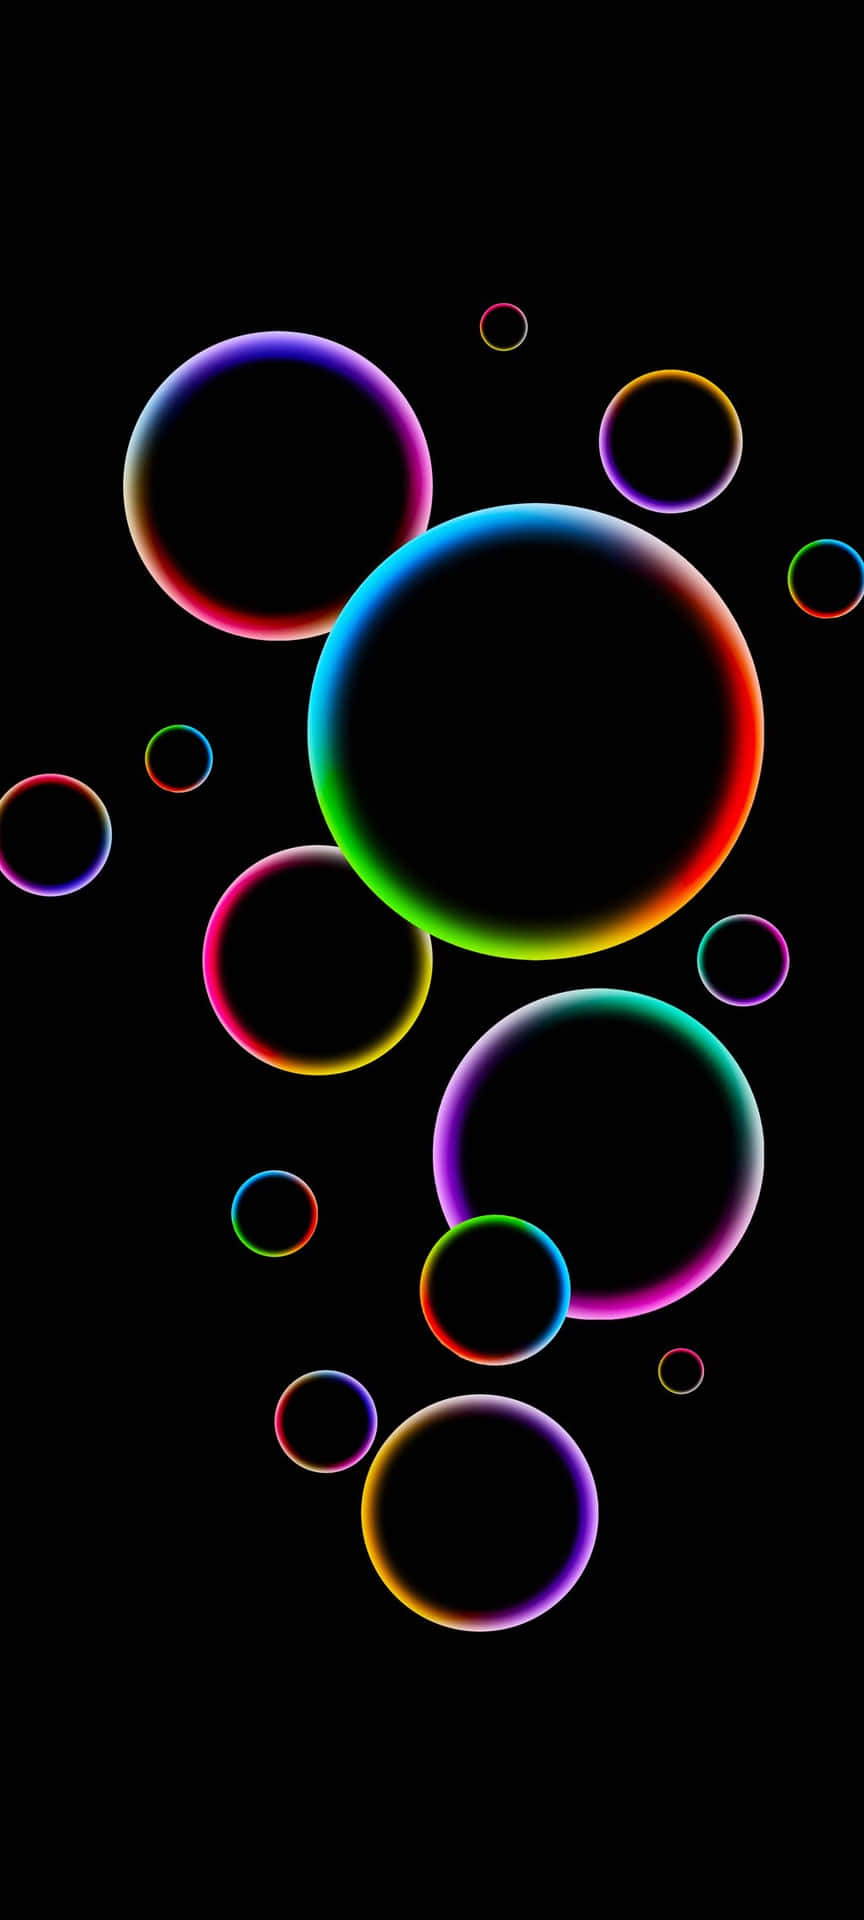 Download Wallpaper 1920x1080 balloons, bubbles, colored, glass, transparent  Full HD 1080p HD Background